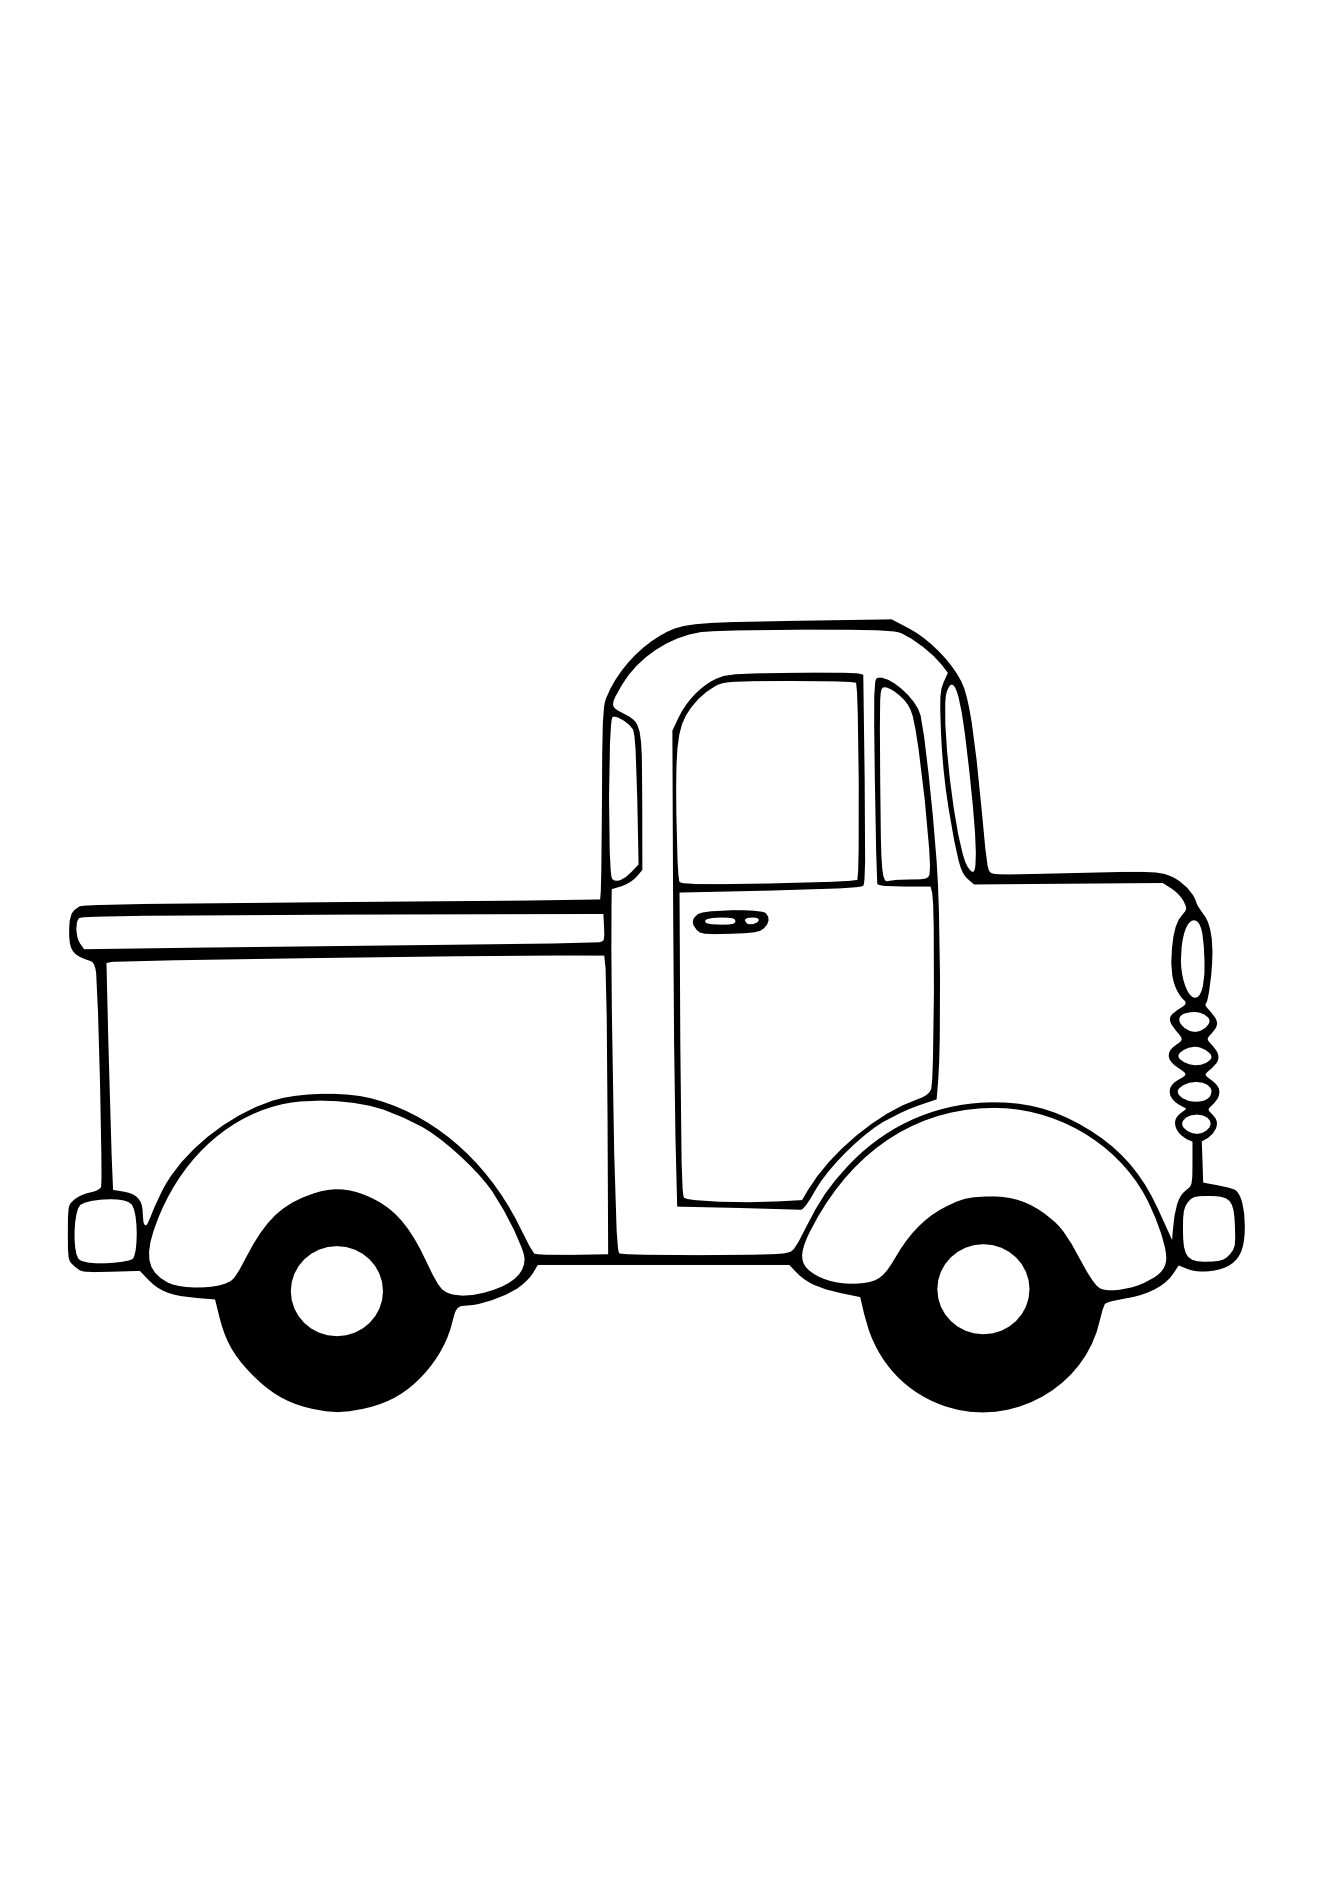 Truck Black White Line Art Christmas Xmas Toy Scalable Vector Graphics